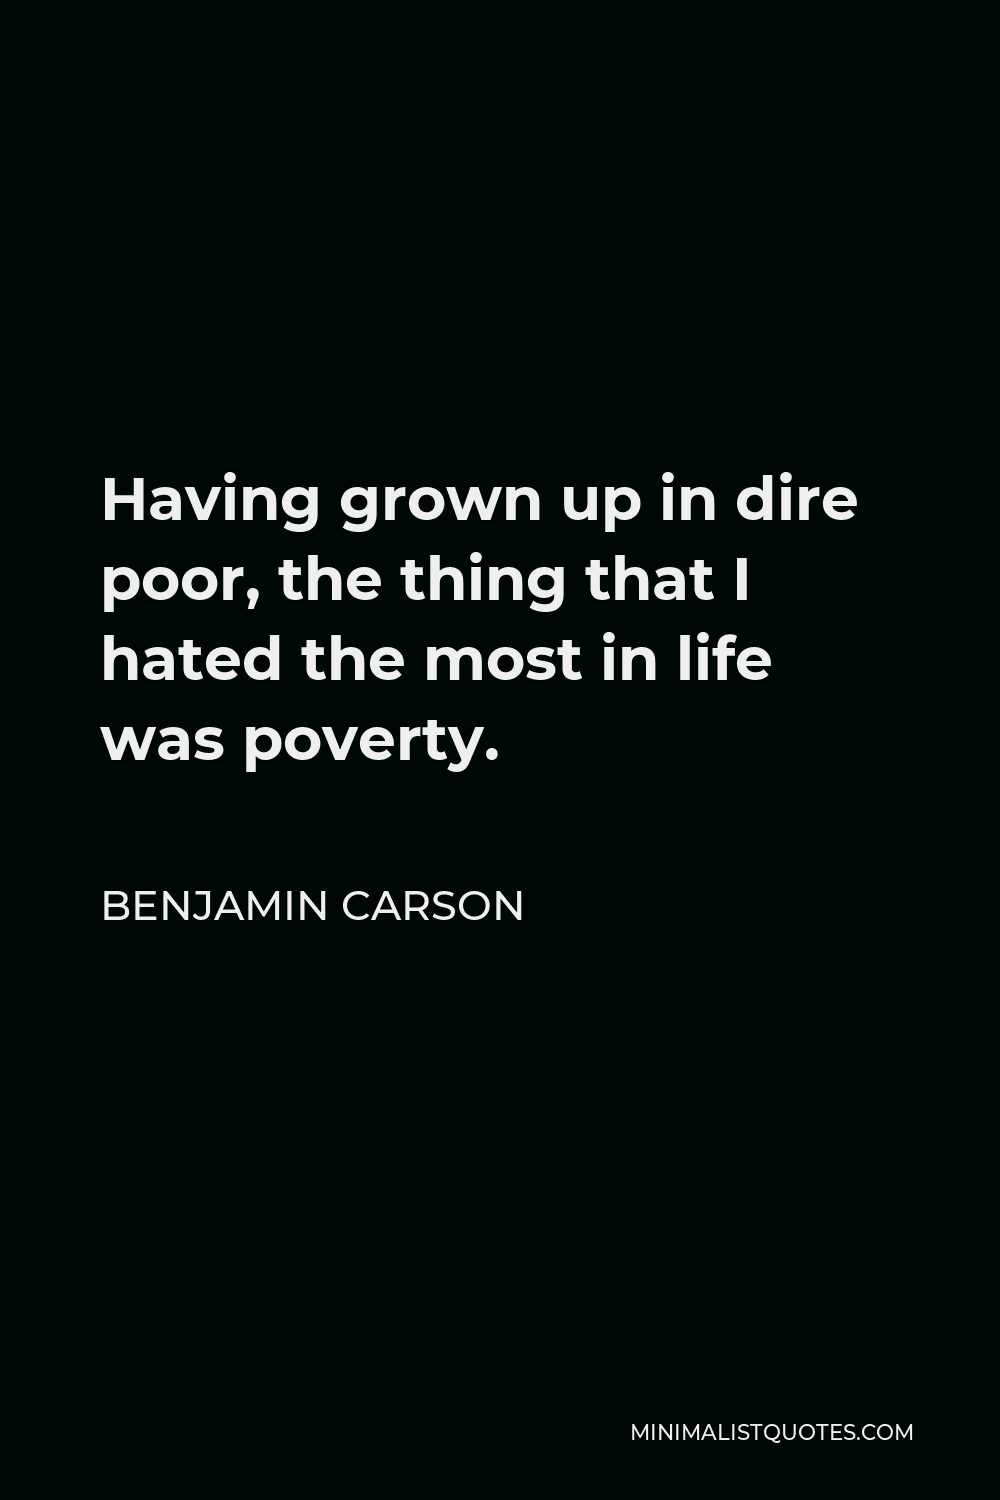 Benjamin Carson Quote - Having grown up in dire poor, the thing that I hated the most in life was poverty.